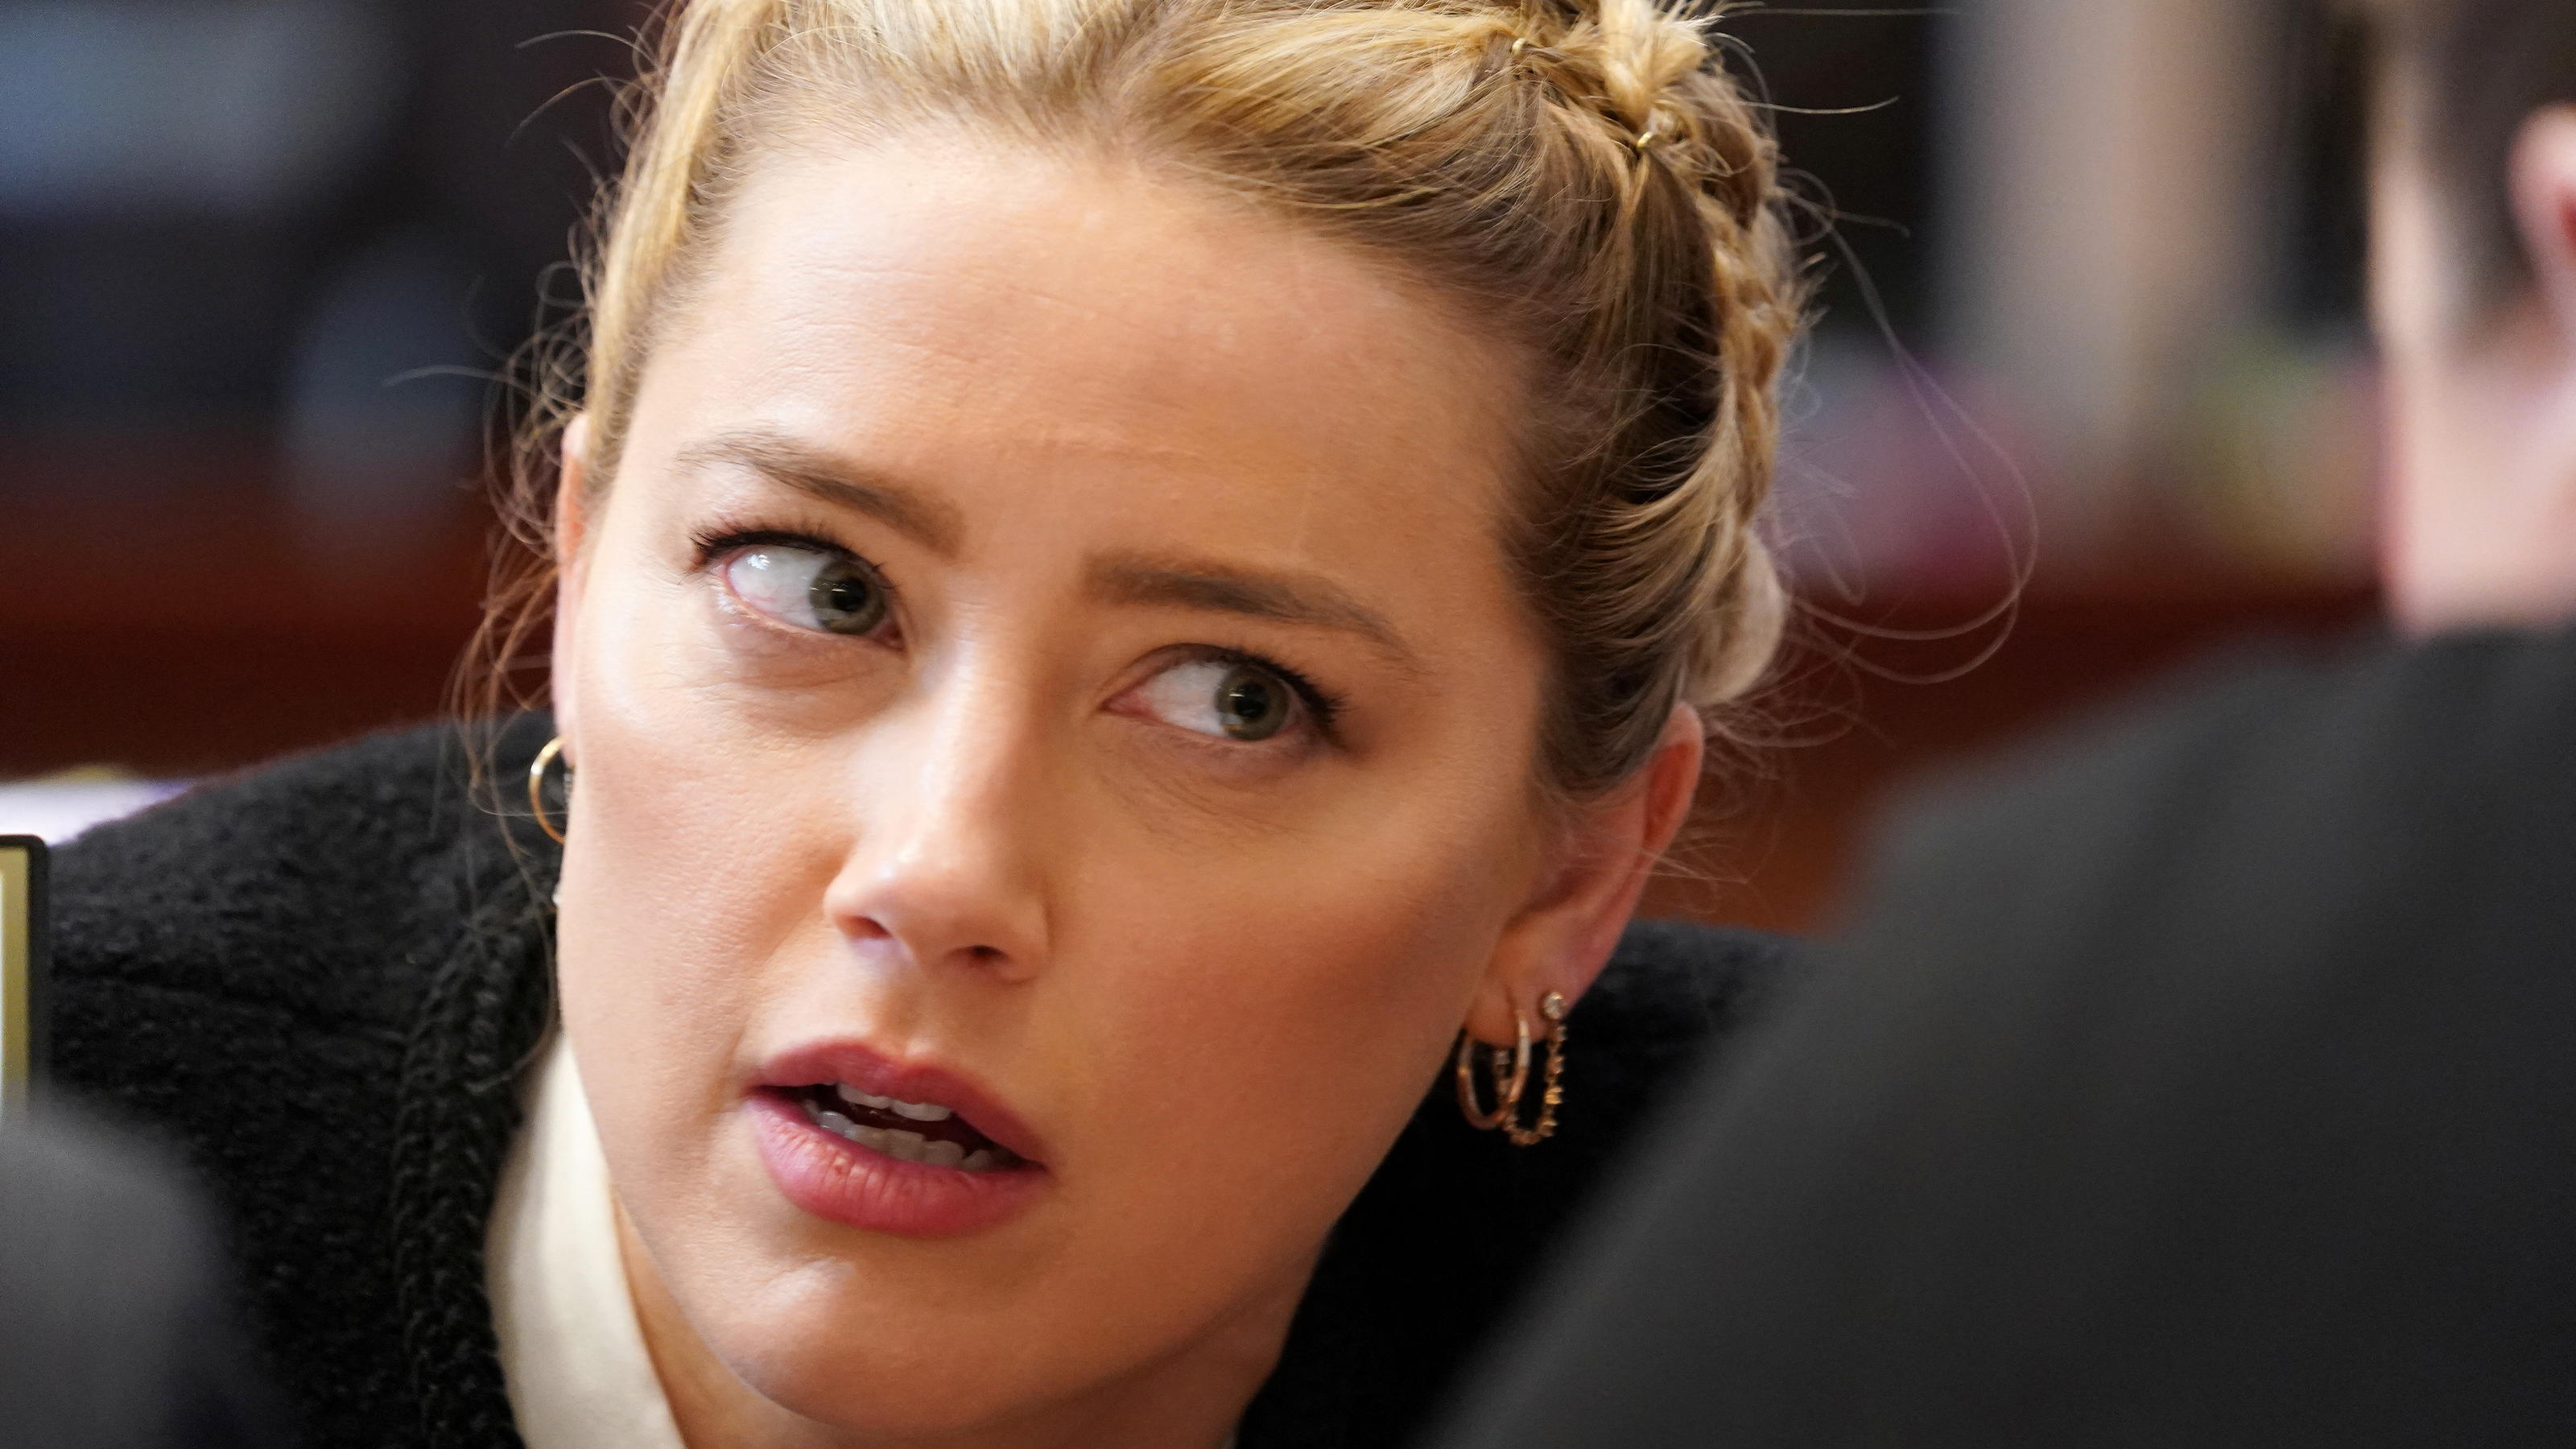 US actor Amber Heard speaks with a member of her legal team as she arrives at the start of the day during the 50 million US dollar Depp vs Heard defamation trial against her at the Fairfax County Circuit Courthouse in Fairfax, Virginia, U.S., May 19,